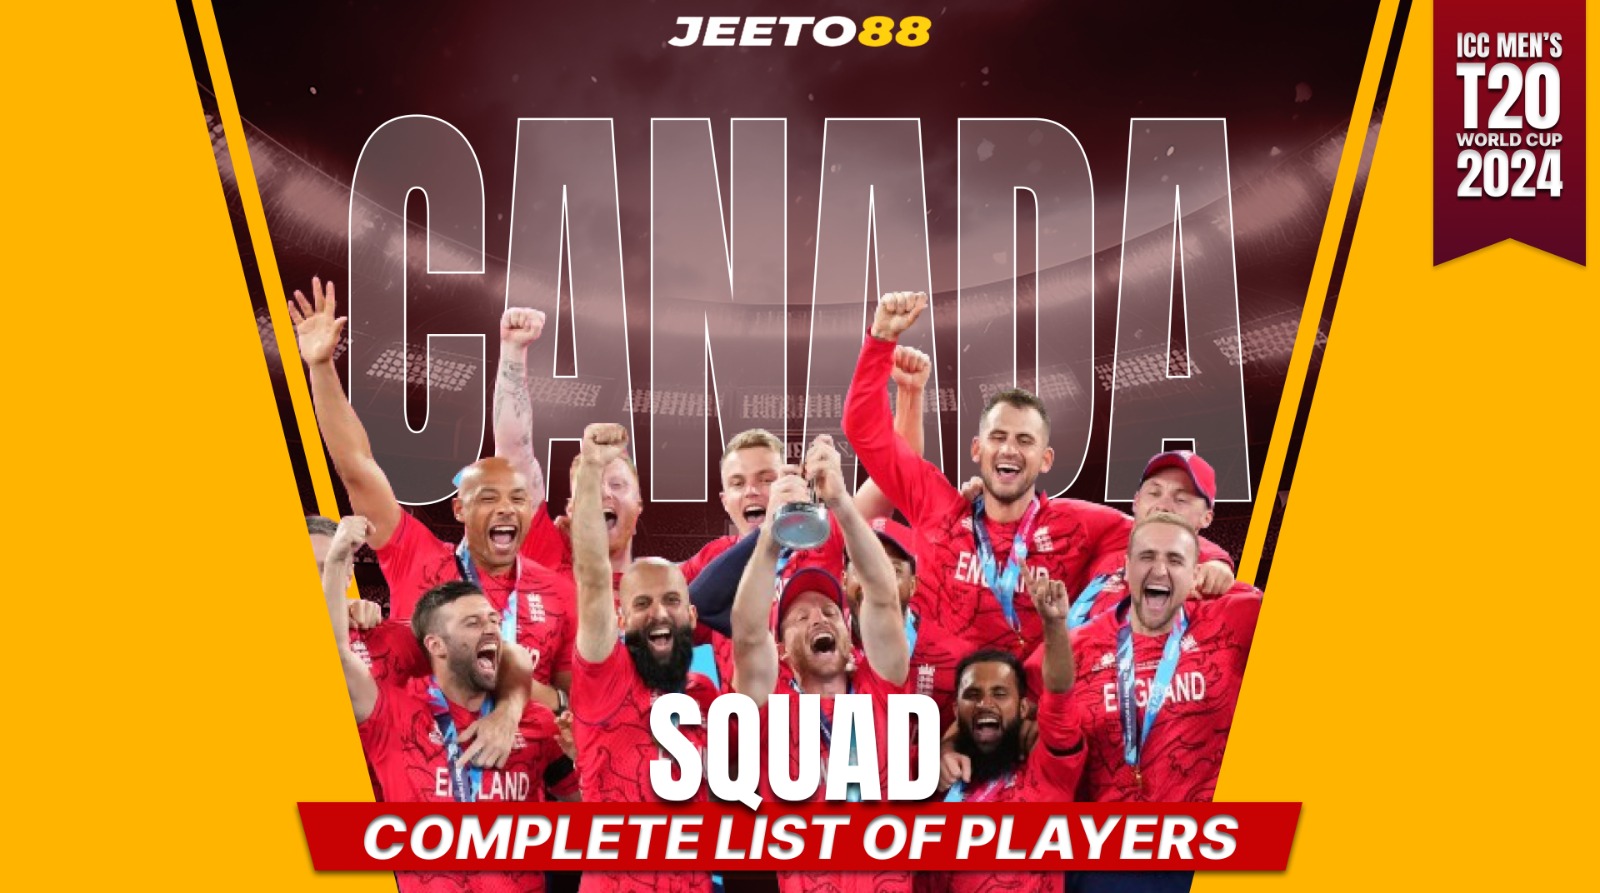 ICC Men’s T20 World Cup 2024 Canada Squad: Complete List of Players » WingsMyPost